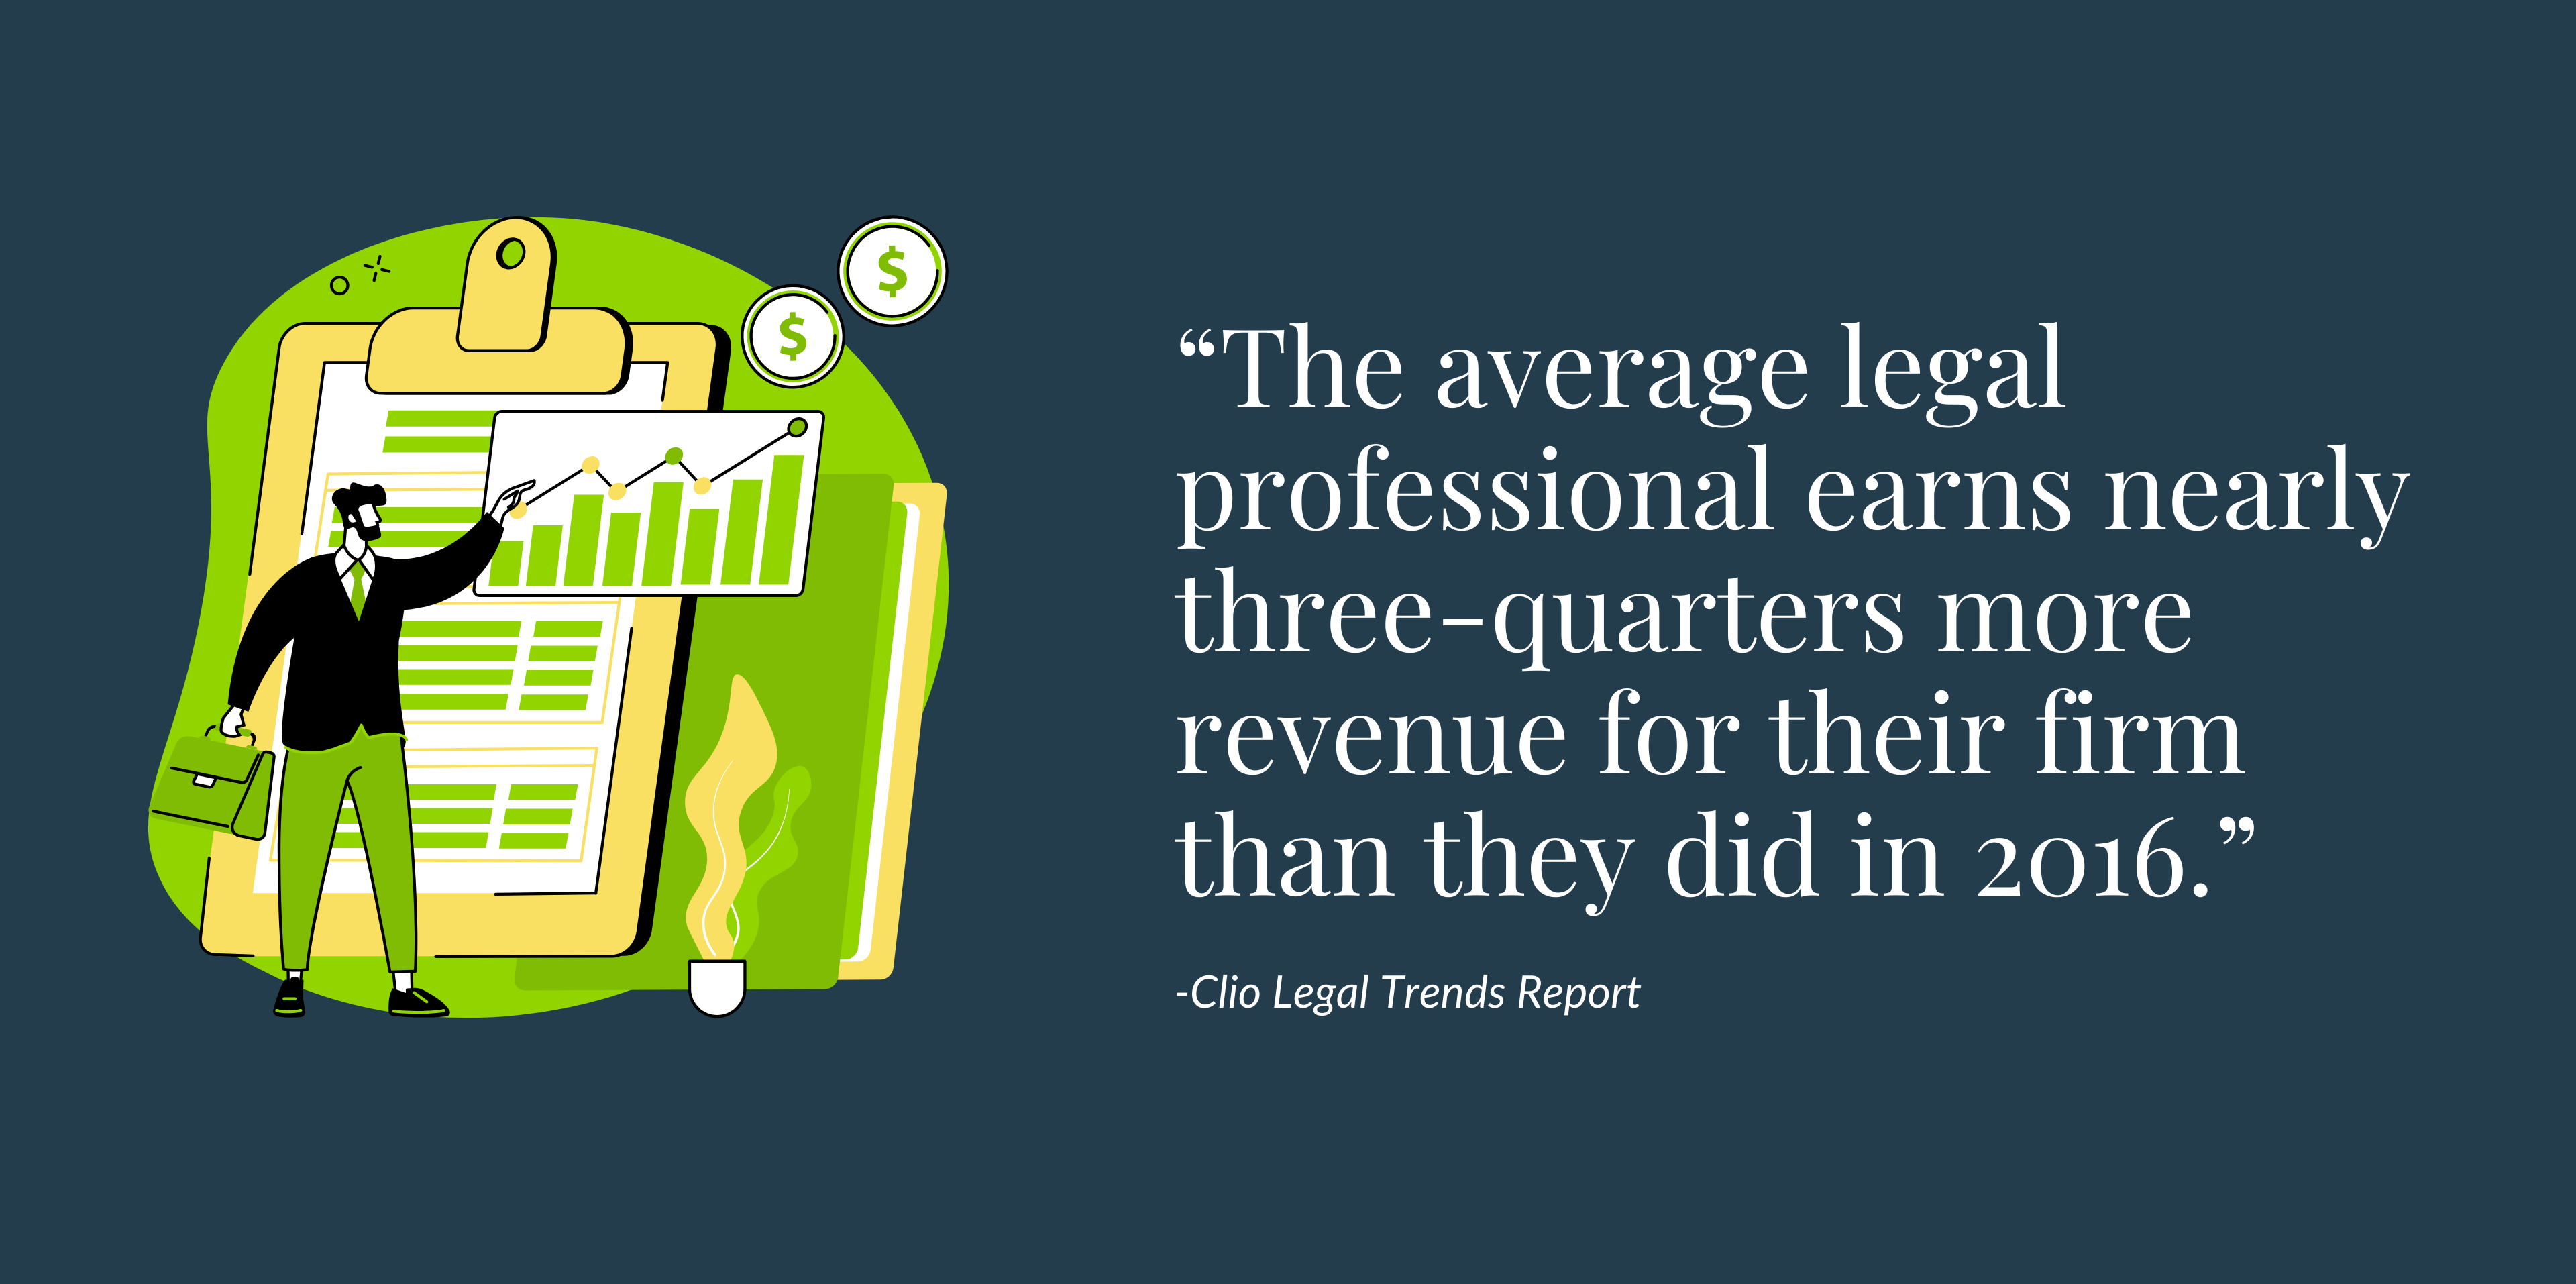 Graphical element of person pointing at clipboard with a chart on it. Text that reads: "The average legal professional earns nearly three-quarters more revenue for their firm than they did in 2016." - Clio Legal Trends Report 